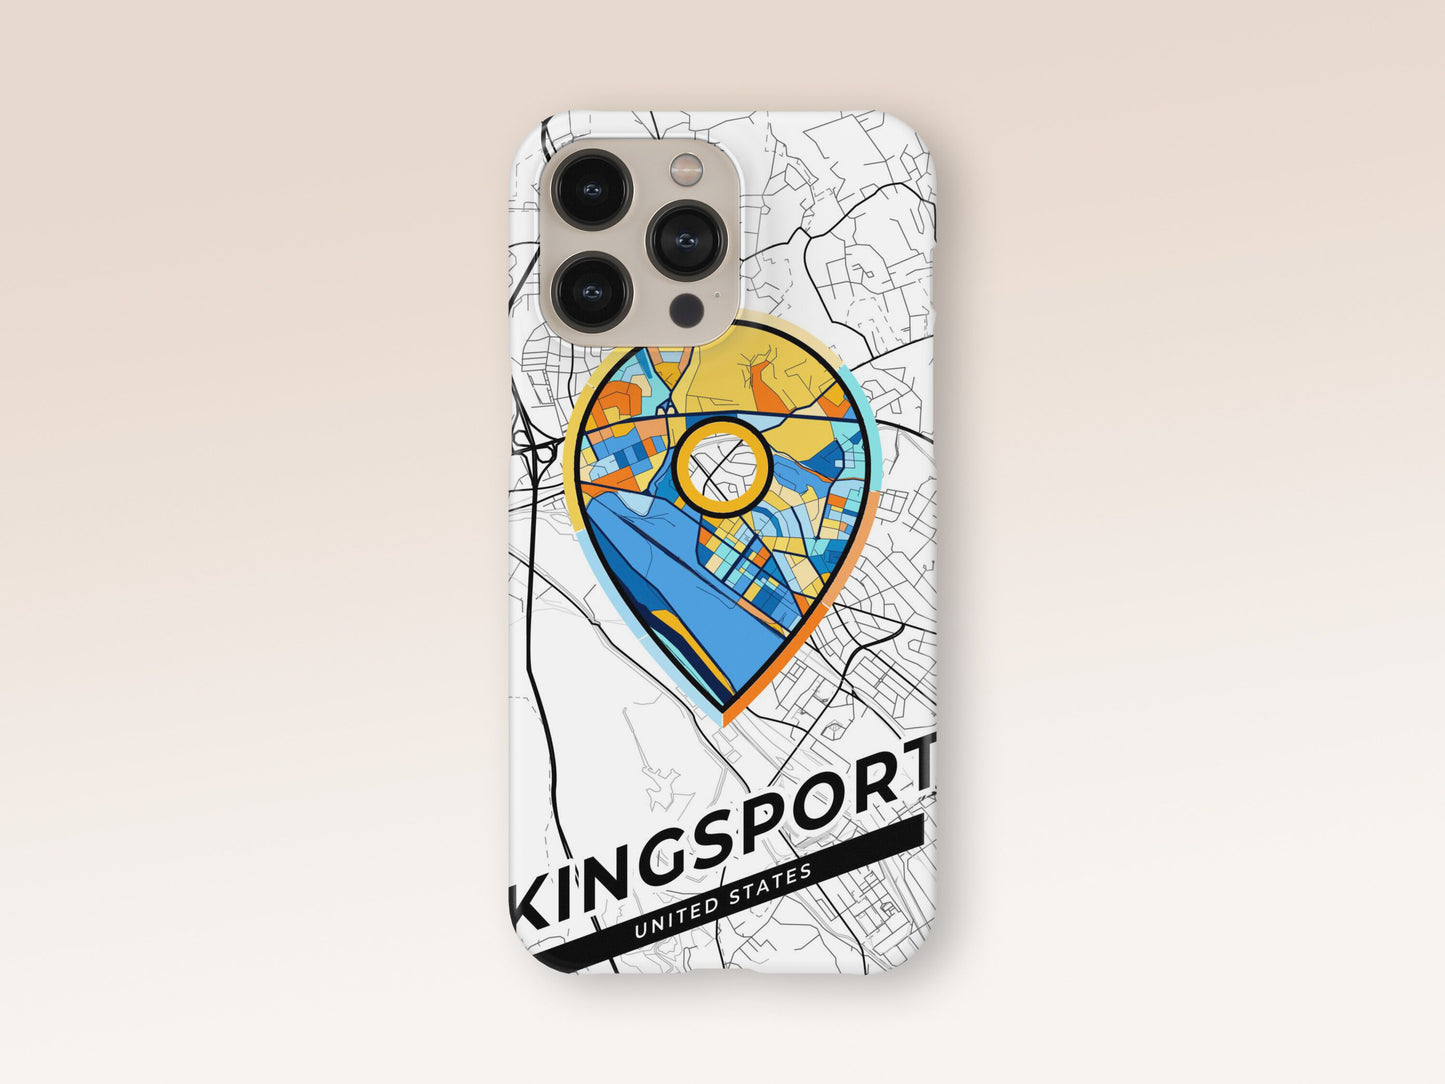 Kingsport Tennessee slim phone case with colorful icon. Birthday, wedding or housewarming gift. Couple match cases. 1